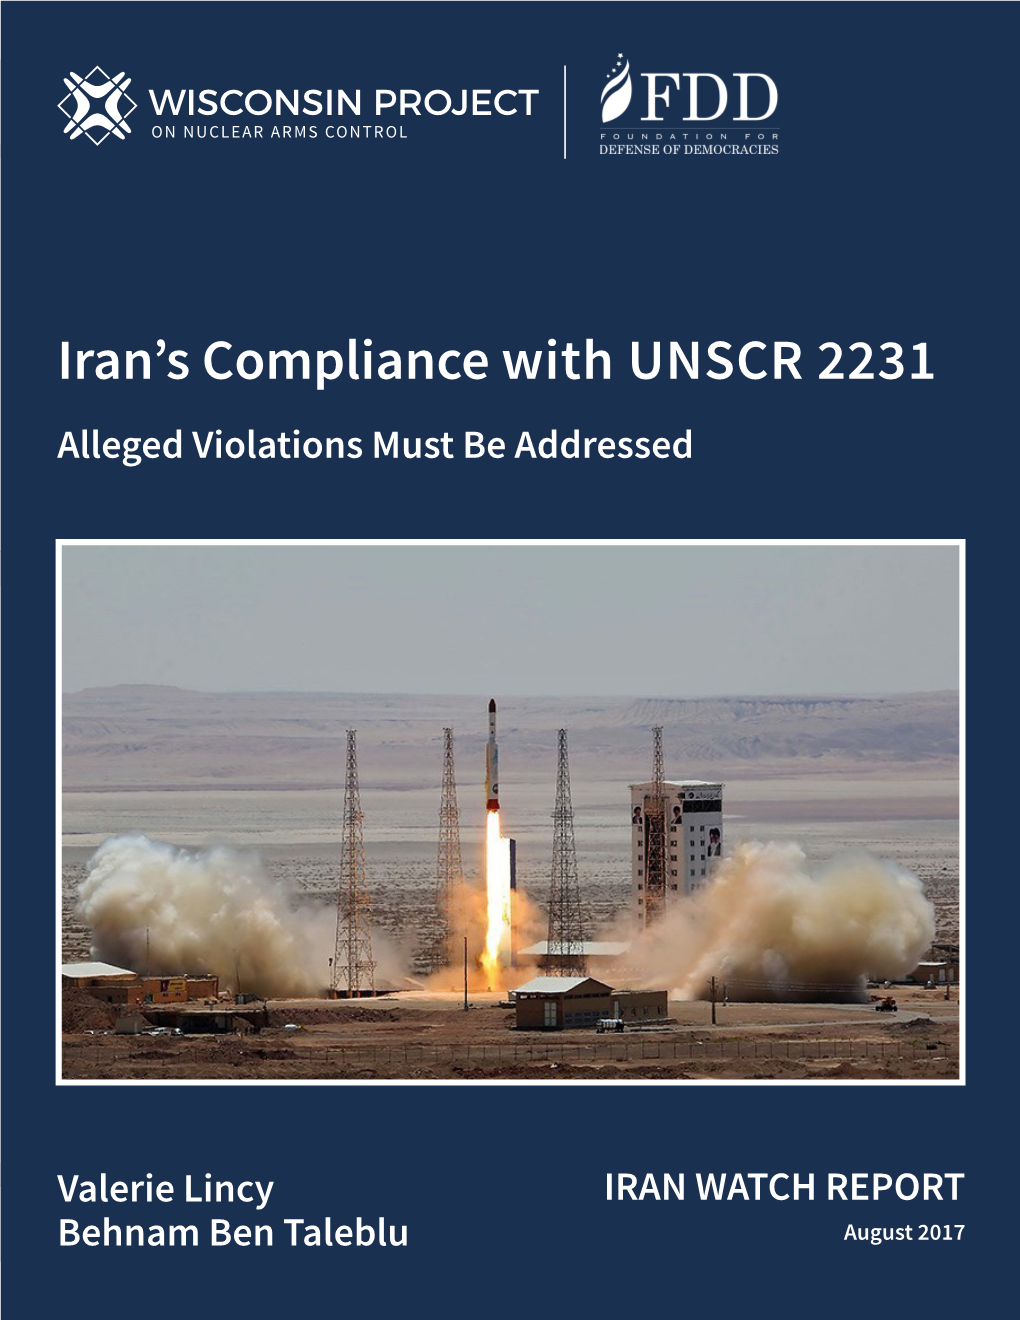 Iran's Compliance with UNSCR 2231